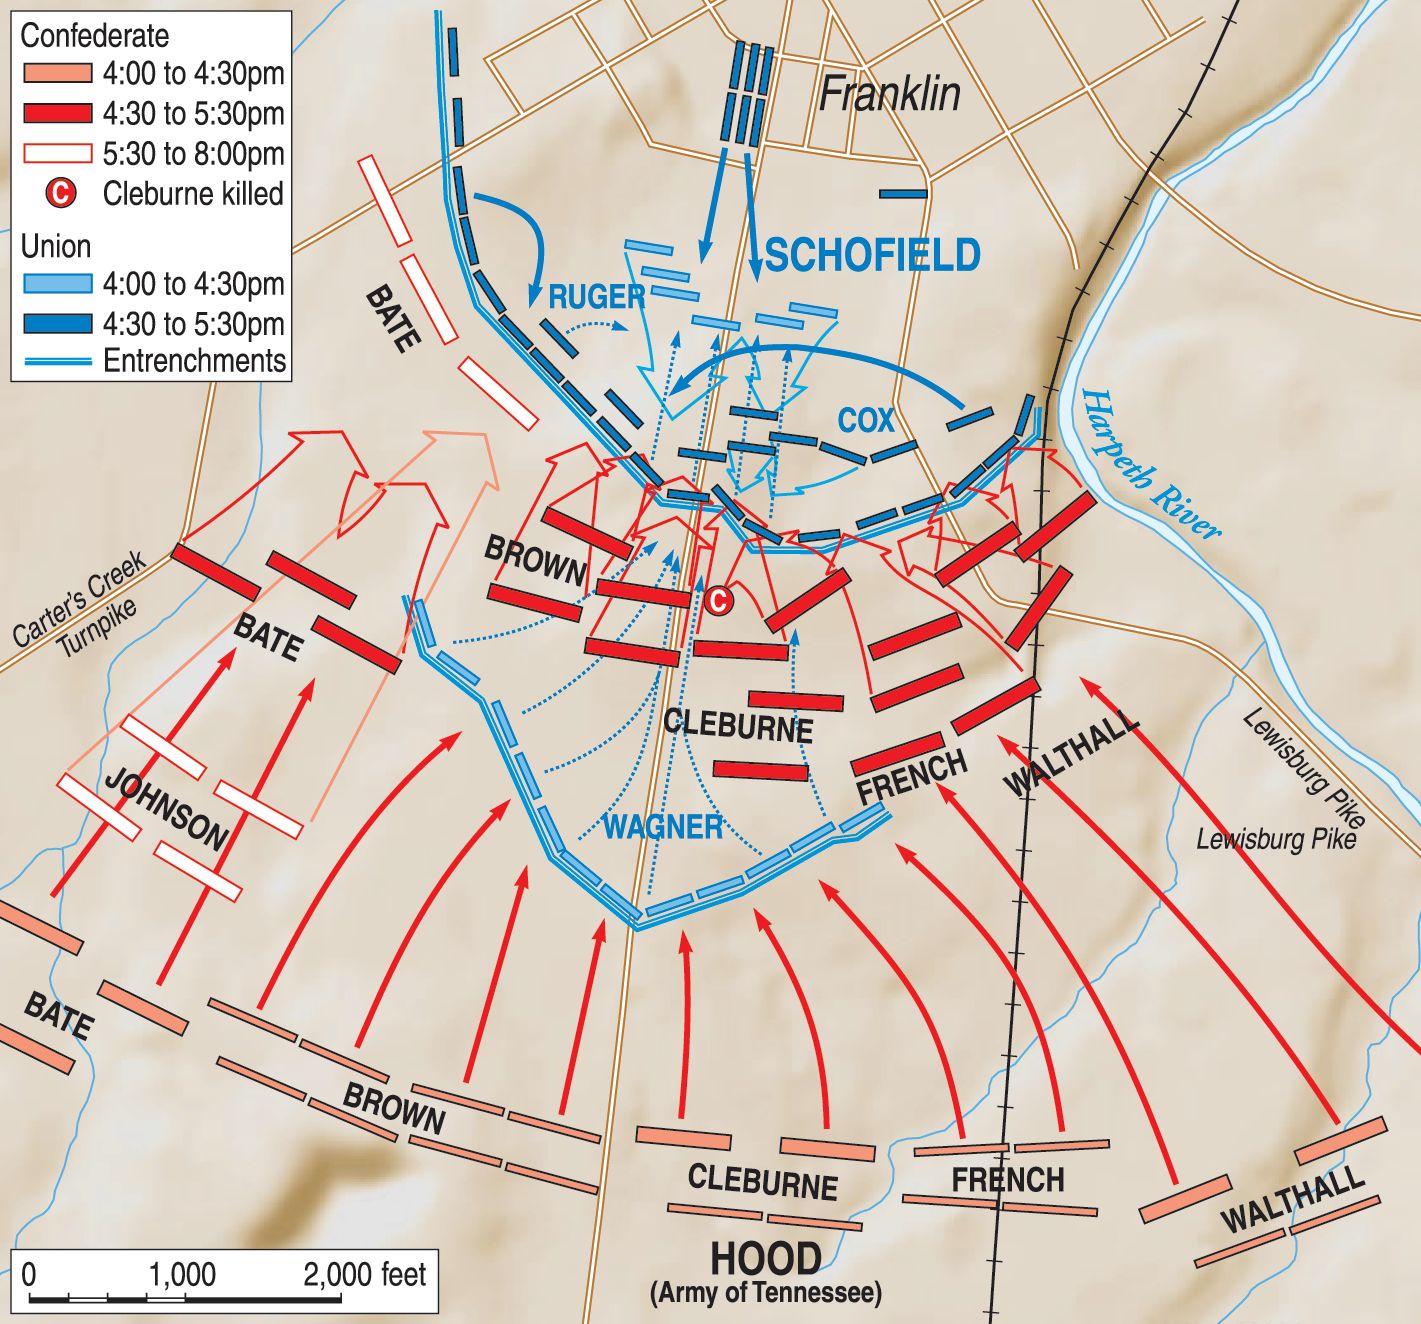 Angered by his failure to cut off Schofield’s retreat at Spring Hill, Hood rashly launched a frontal assault across two miles of open ground against an entrenched enemy. The result was 7,000 Confederate casualties, among which were 14 generals killed, wounded, or captured.